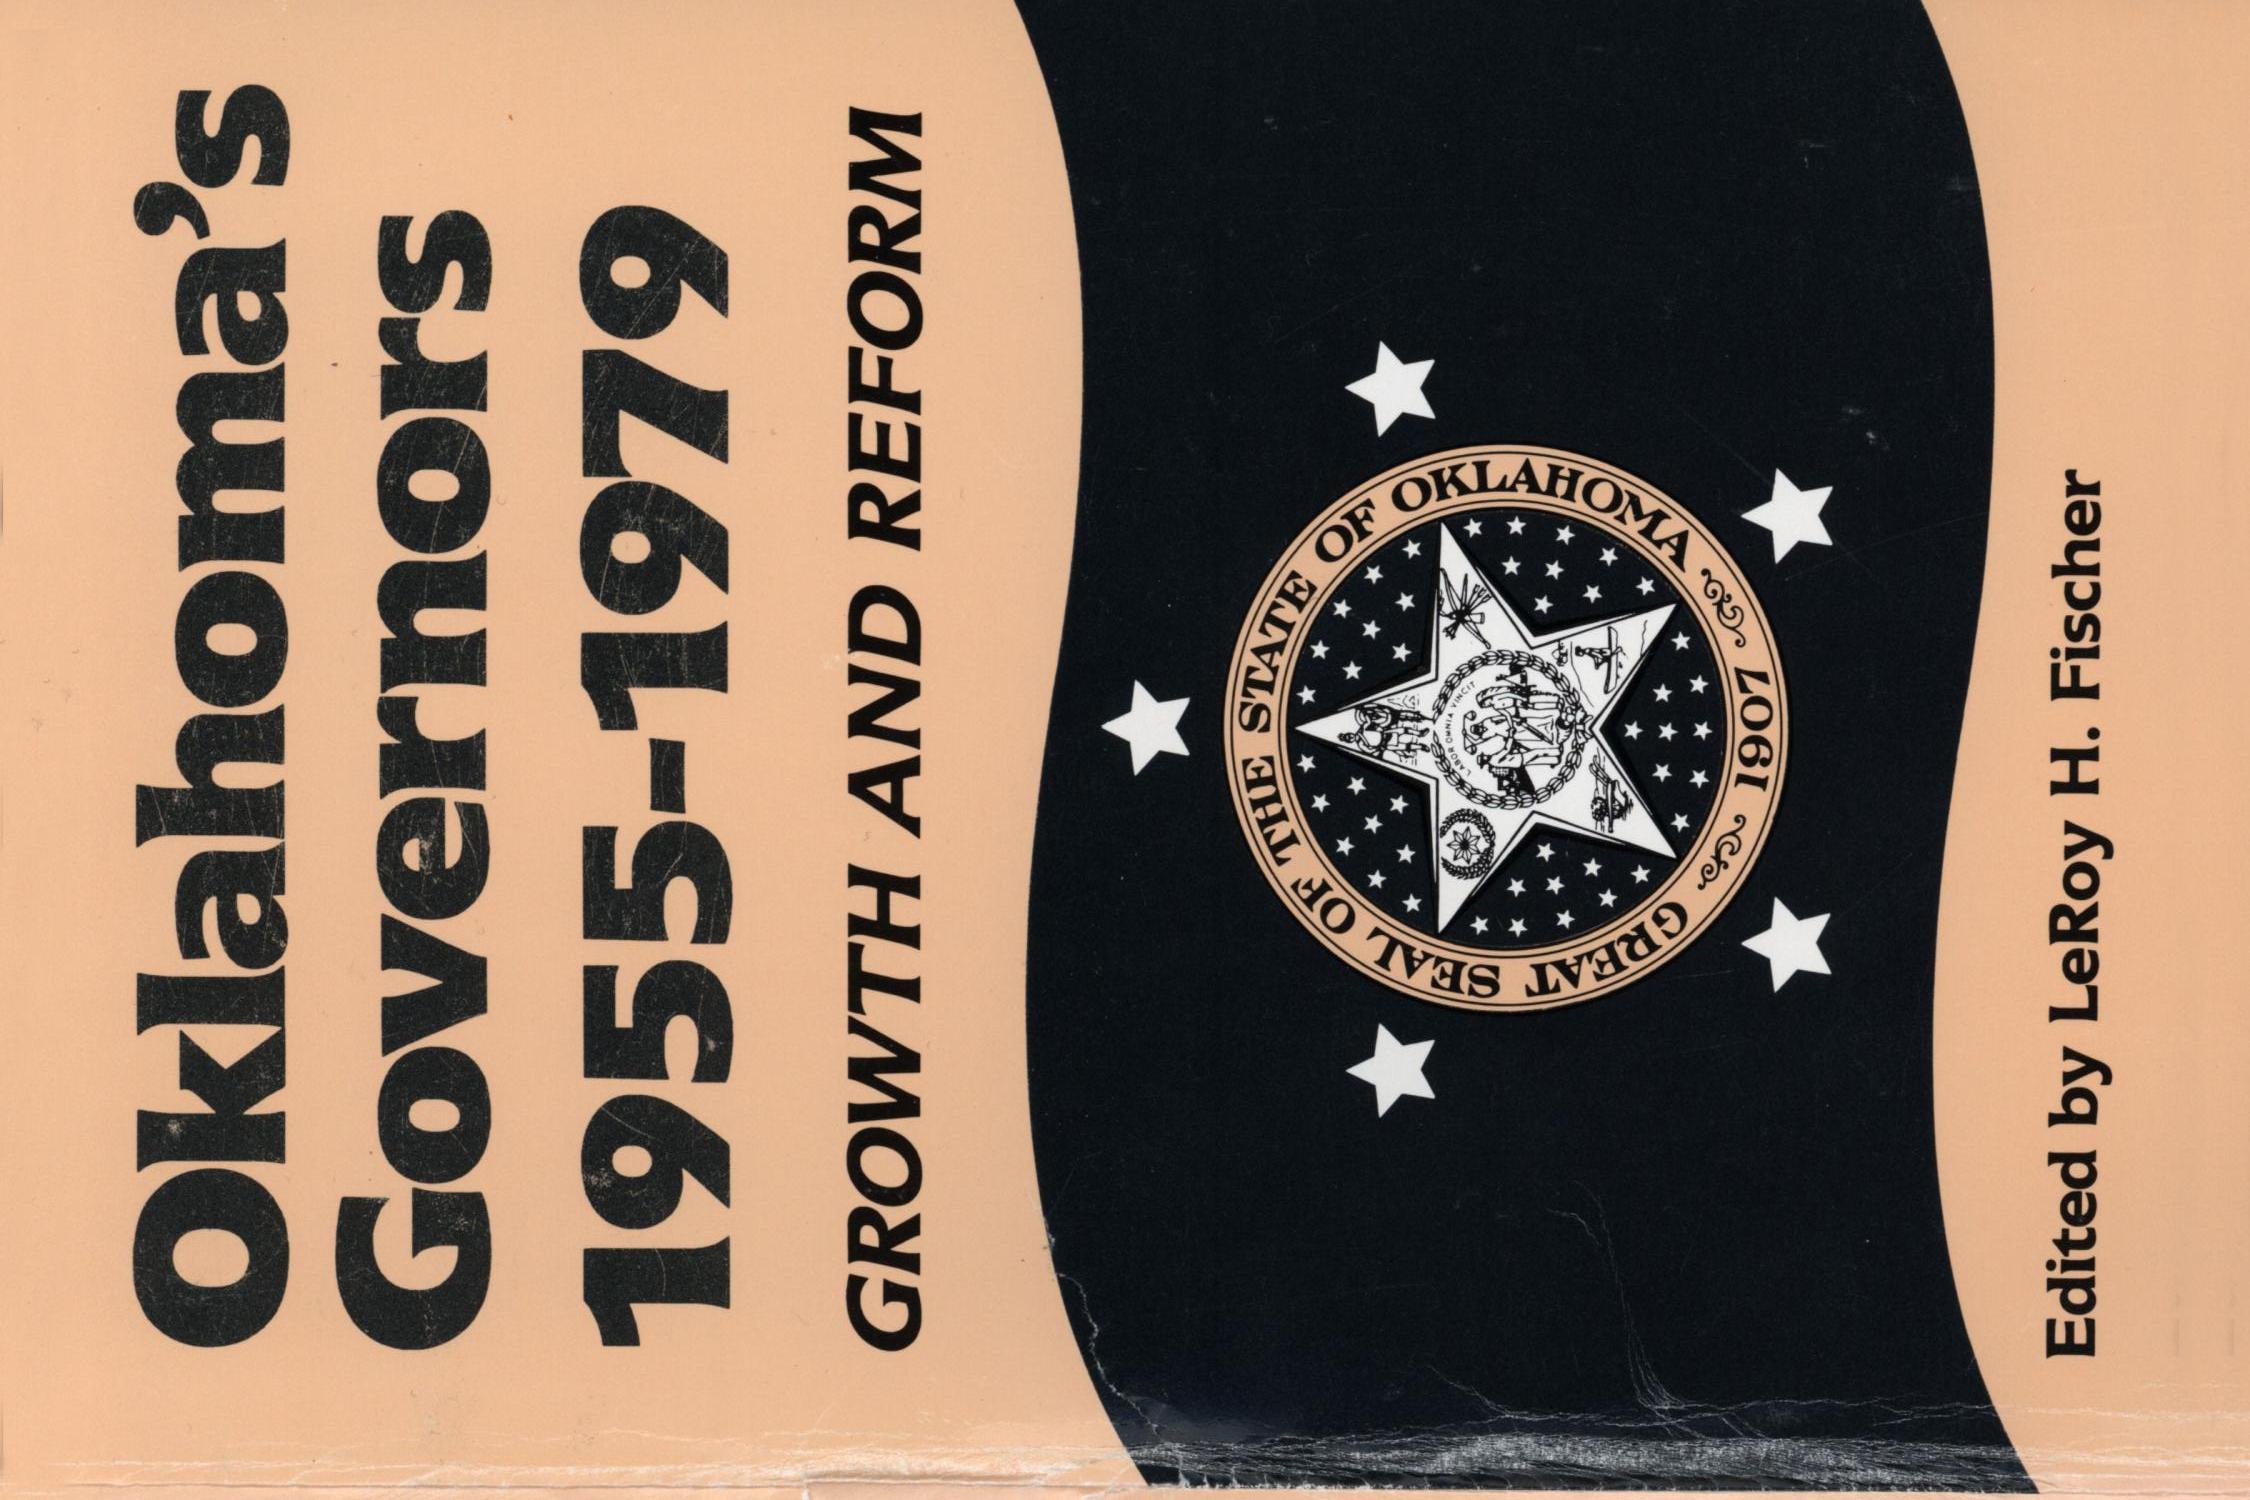 Oklahoma's Governors, 1955-1979: Growth and Reform
                                                
                                                    Front Cover
                                                